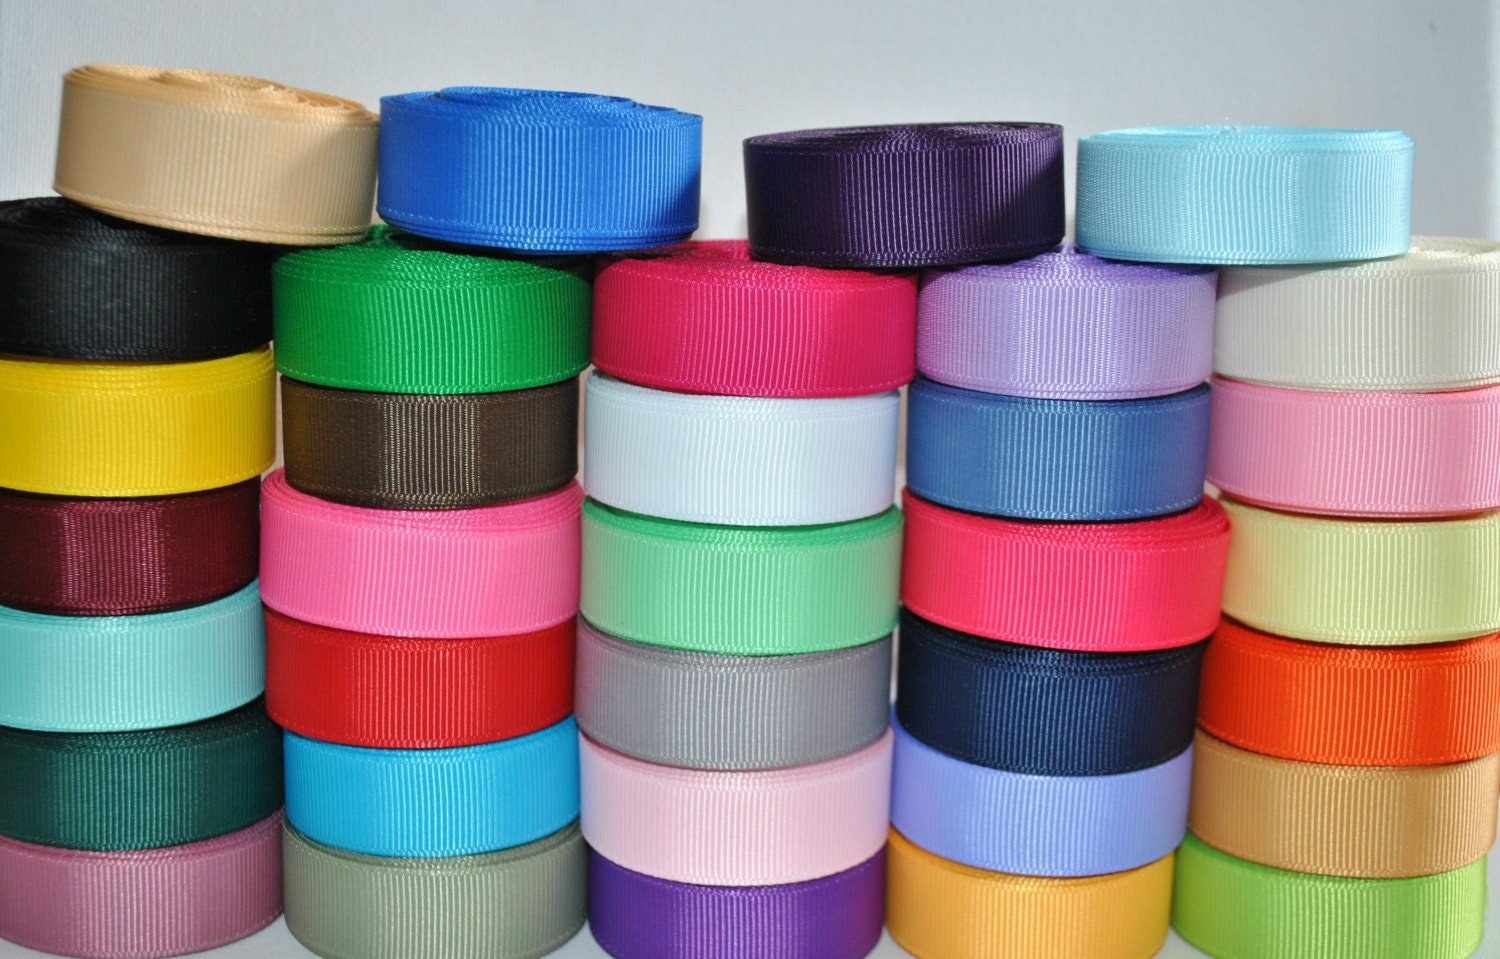 Wholesale Grosgrain Ribbon Solid Color 58 34 By Azenithcollection 0899